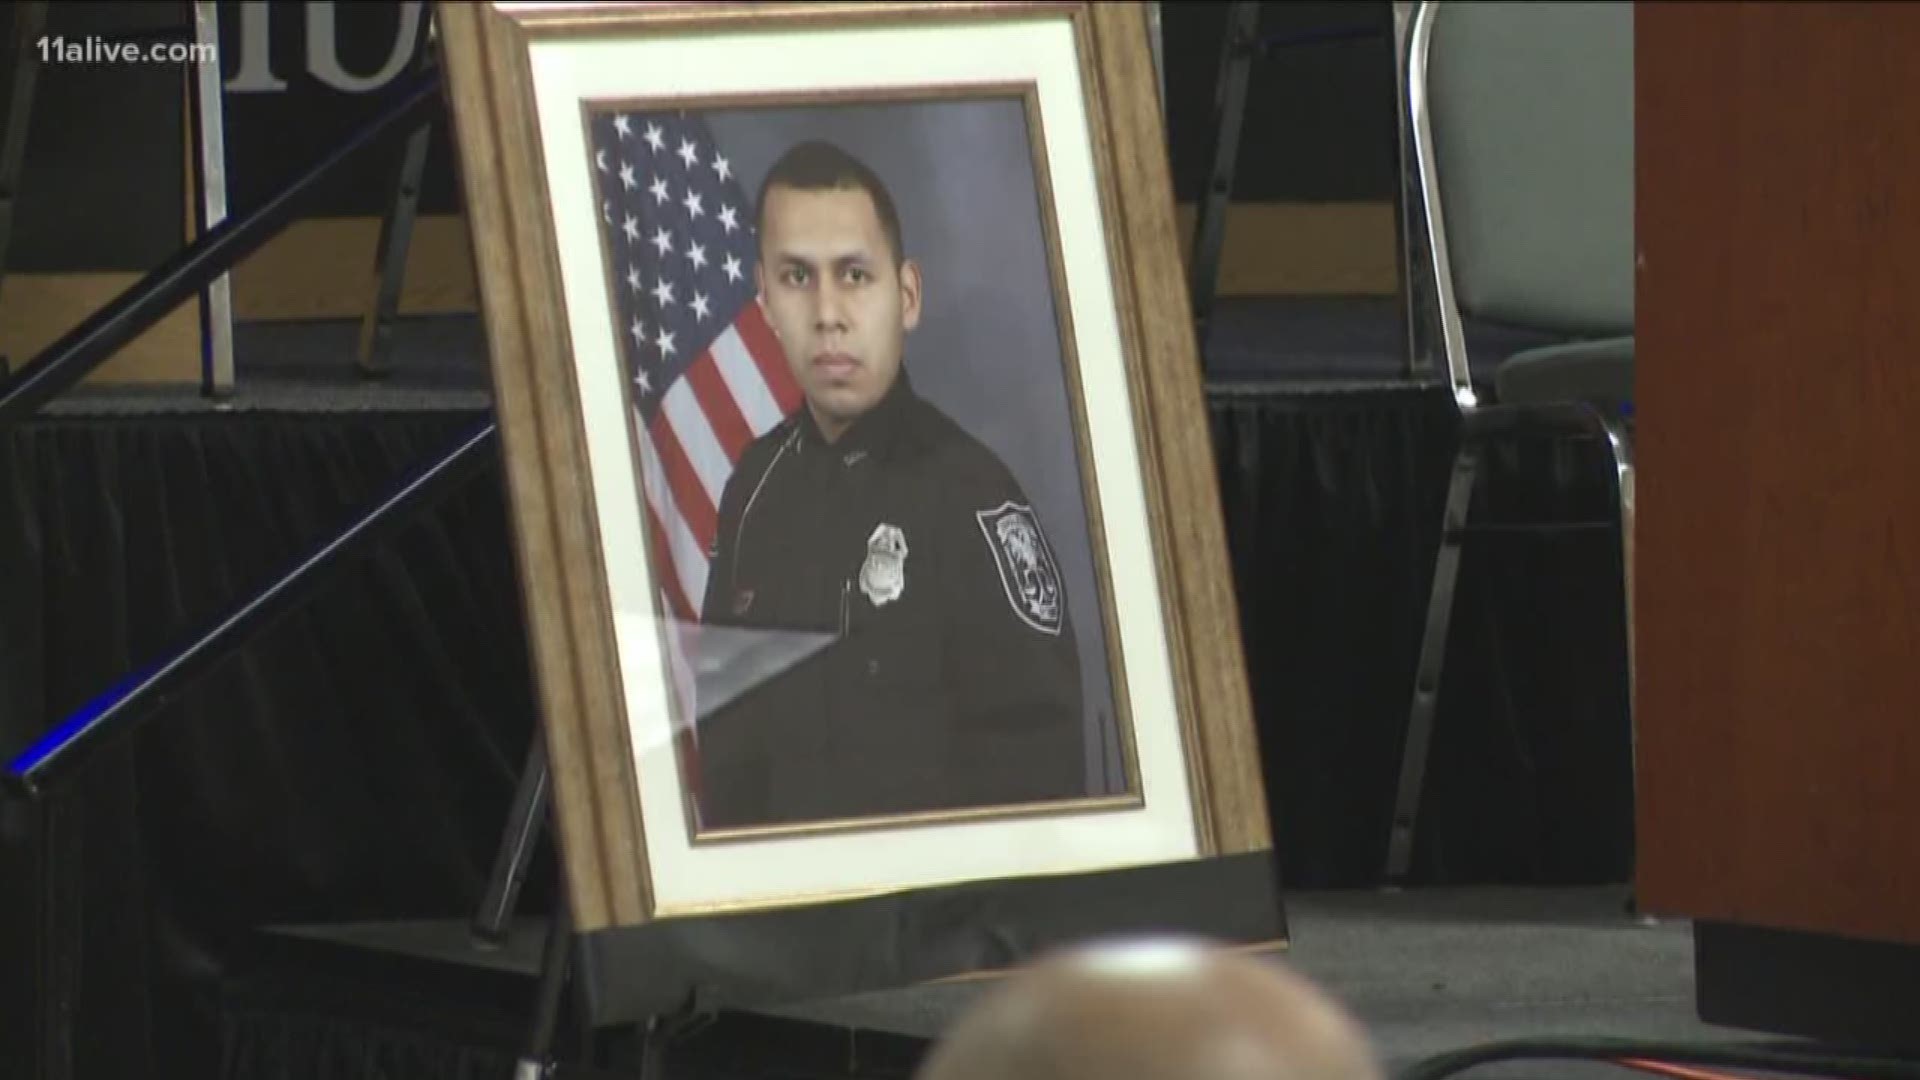 It was a night honoring a hero as hundreds showed up to pay their respects for the DeKalb County Officer Edgar Flores.